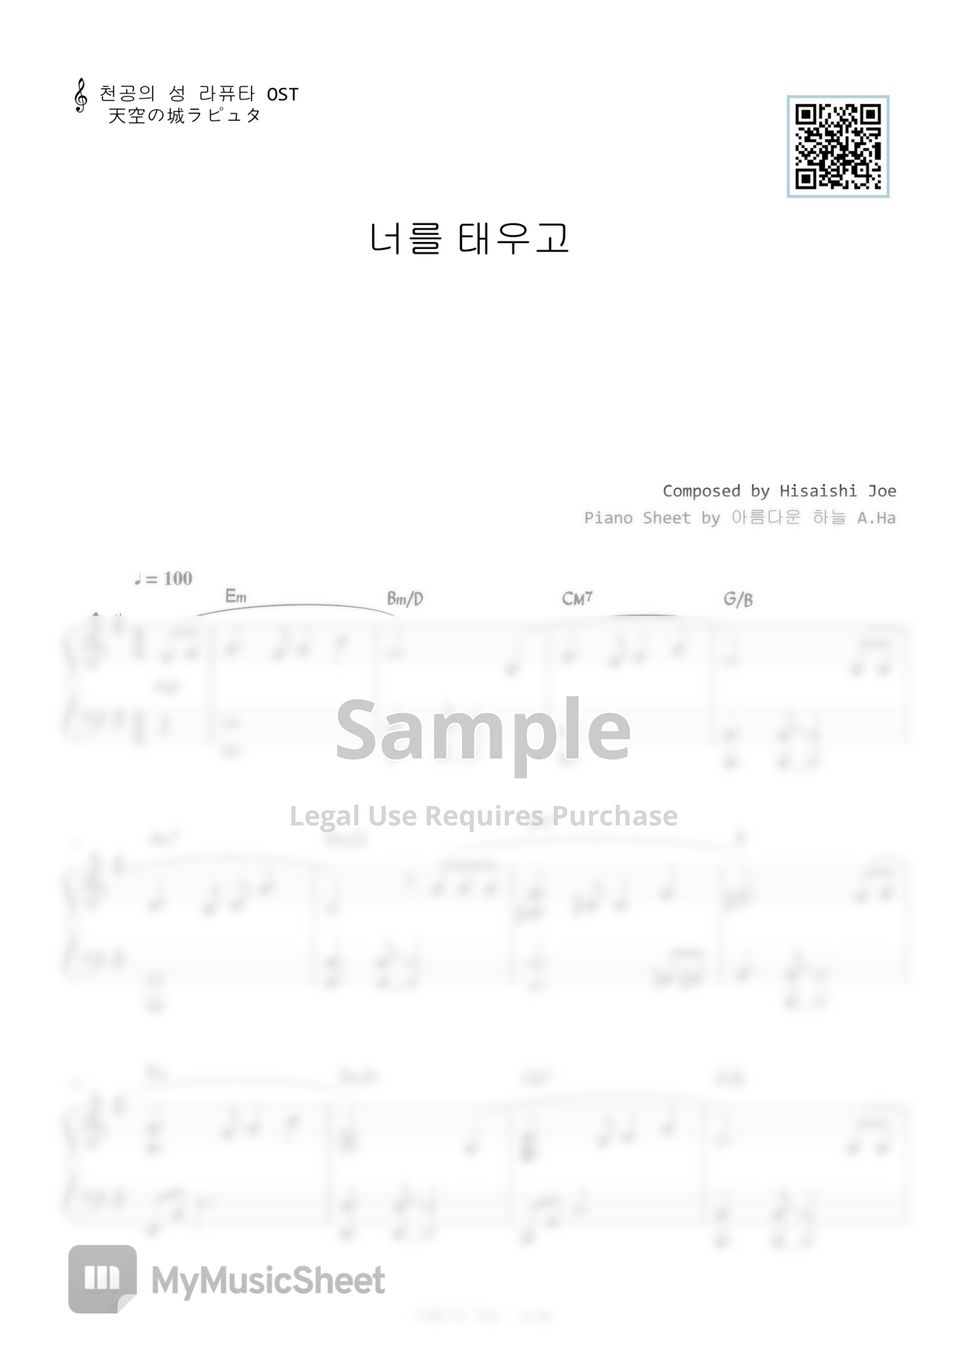 LAPUTA Castle in the Sky OST - Carrying you (Easy Key) by A.Ha